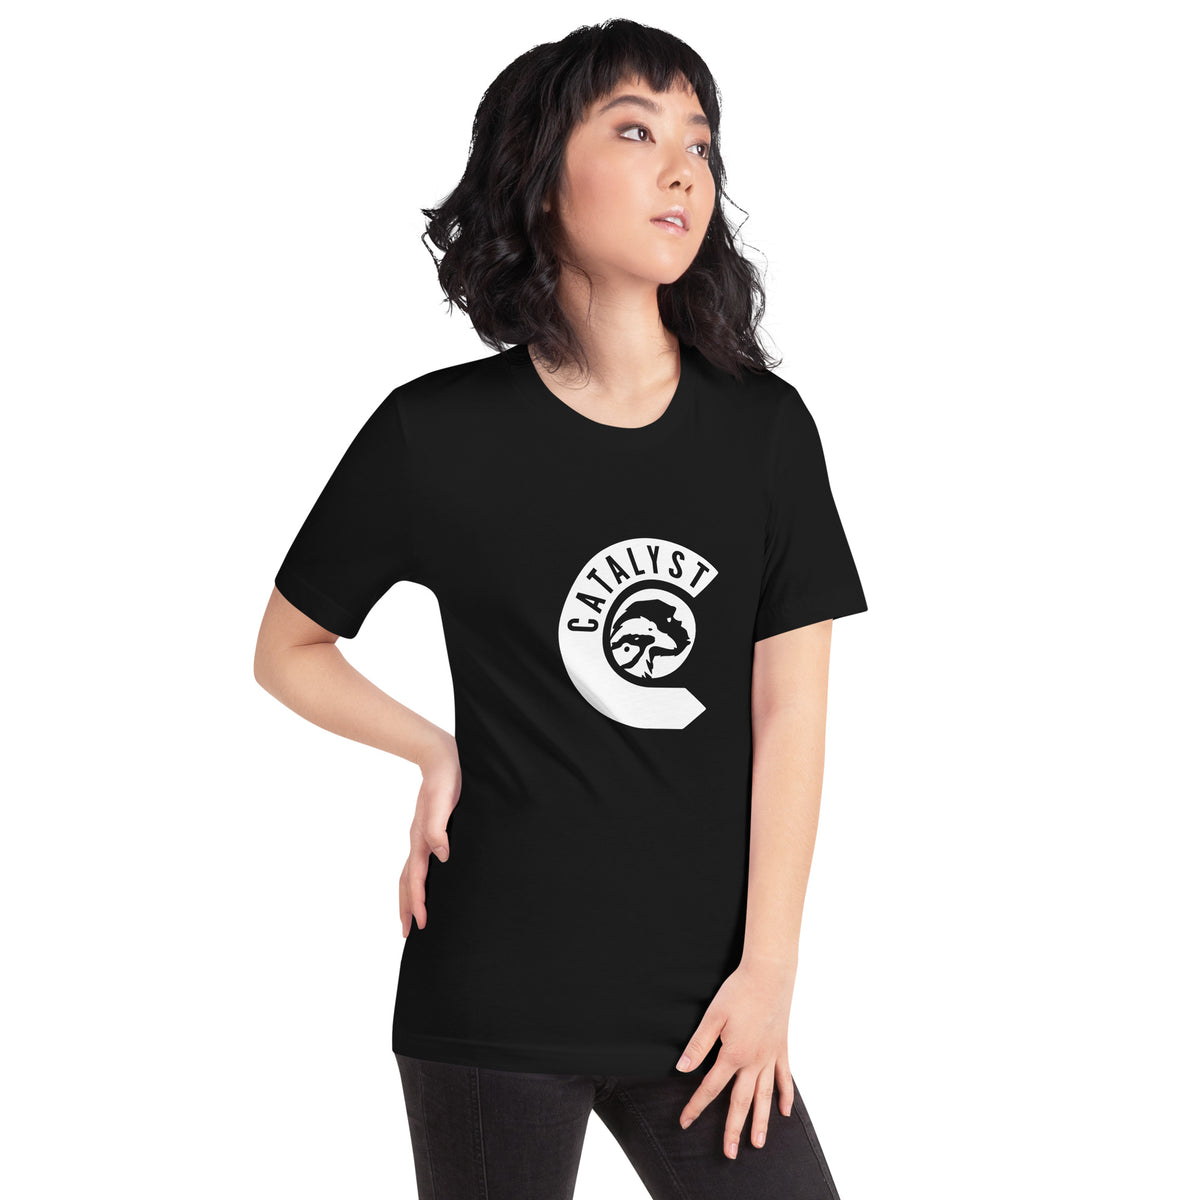 Catalyst Creatures Performance T-Shirt (Adult Sizes)